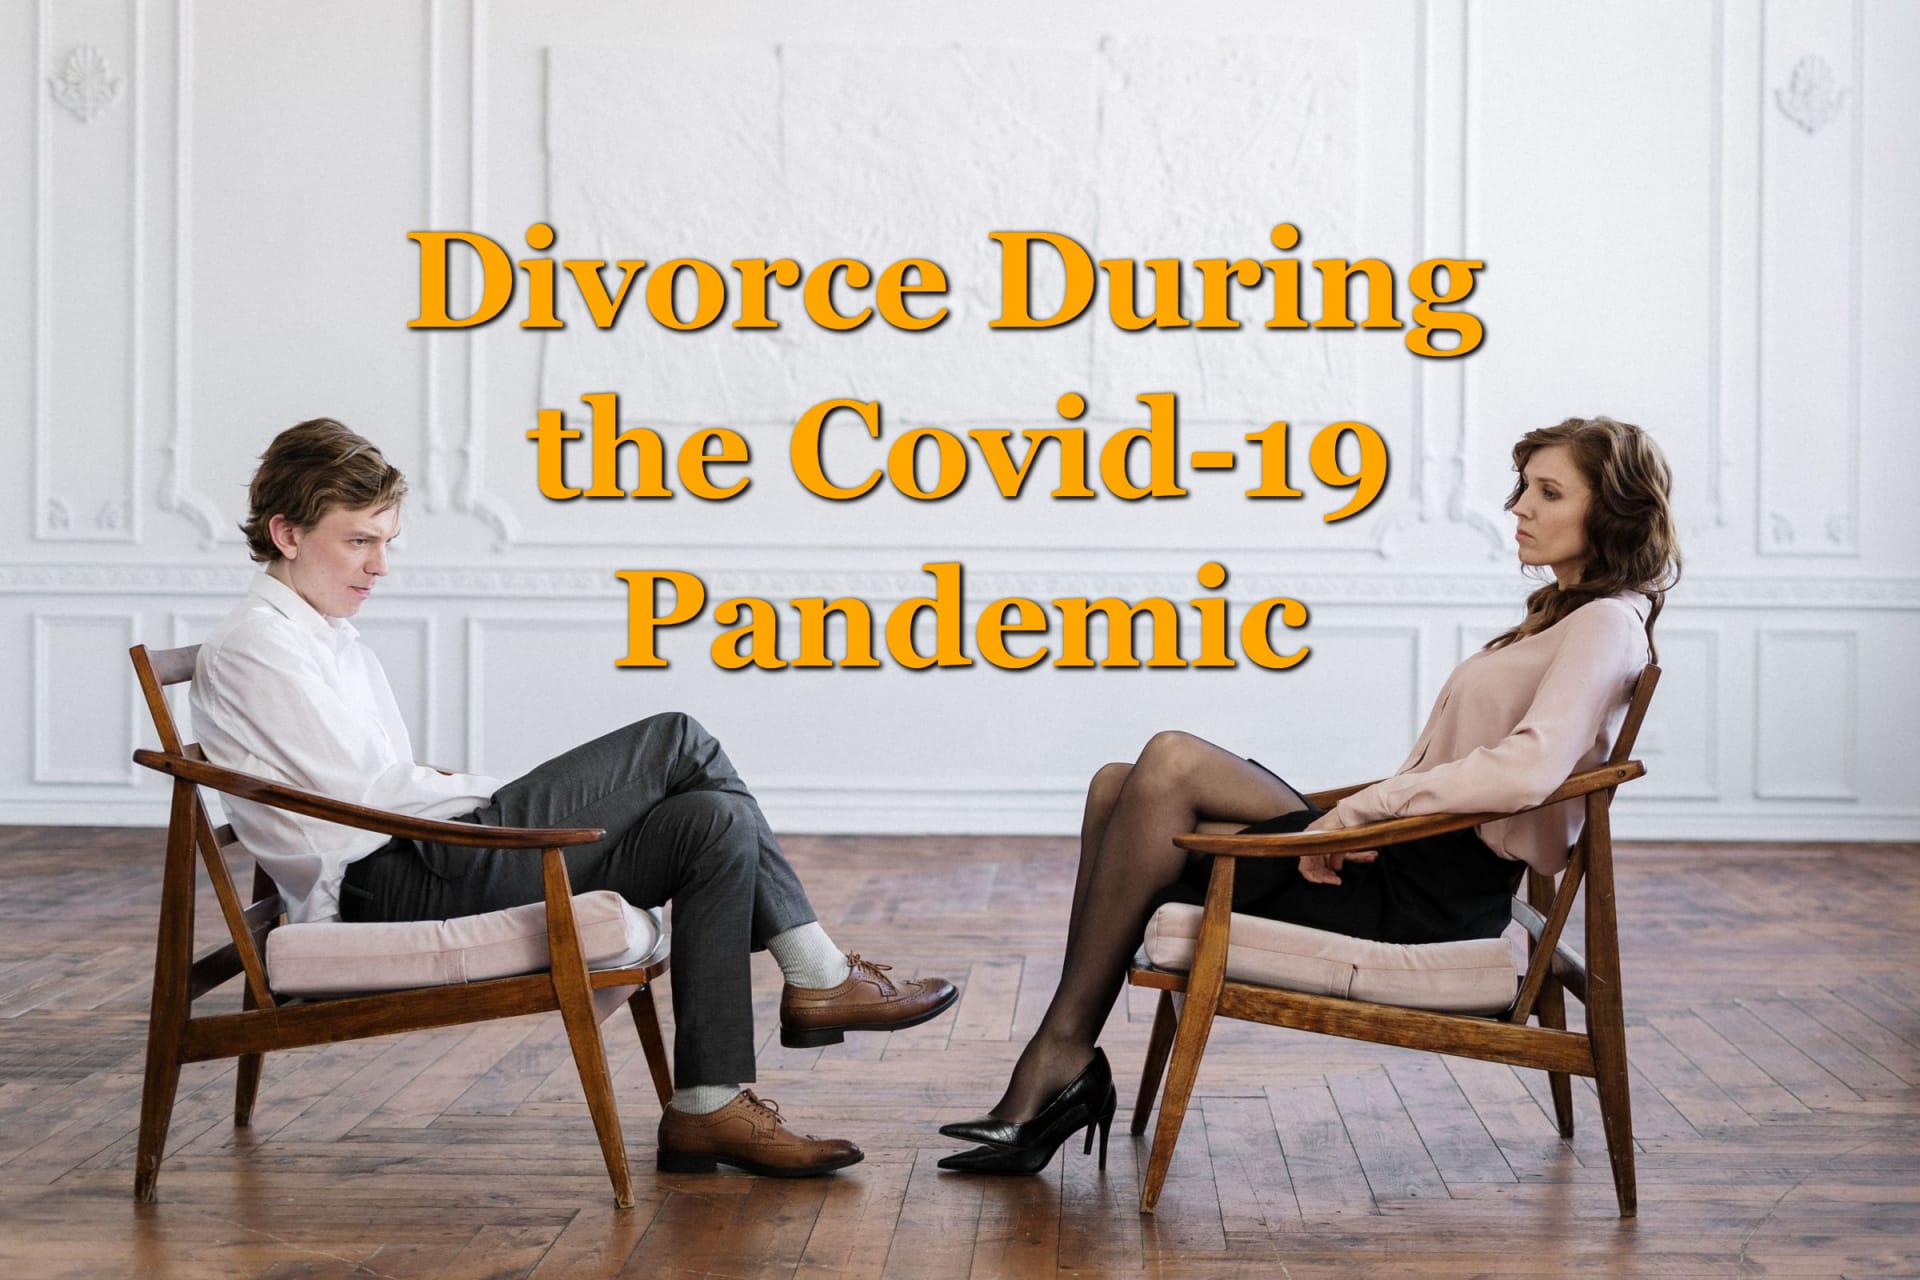 Divorce During the COVID-19 Pandemic